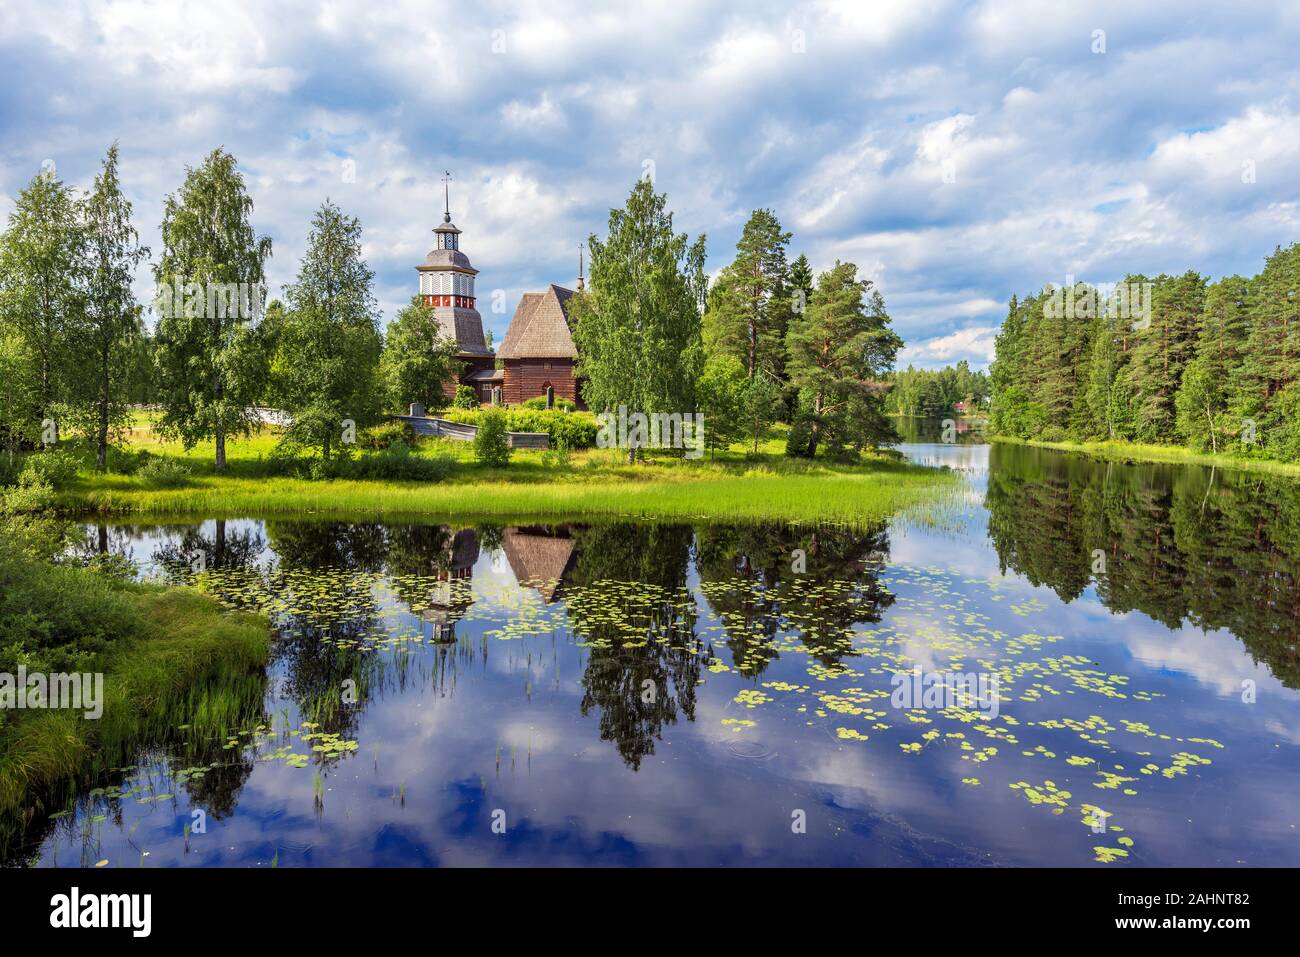 Old wooden church of Petajavesi village is a part of natural environment of lake and forests. Jyvaskyla region in Central Finland. Stock Photo